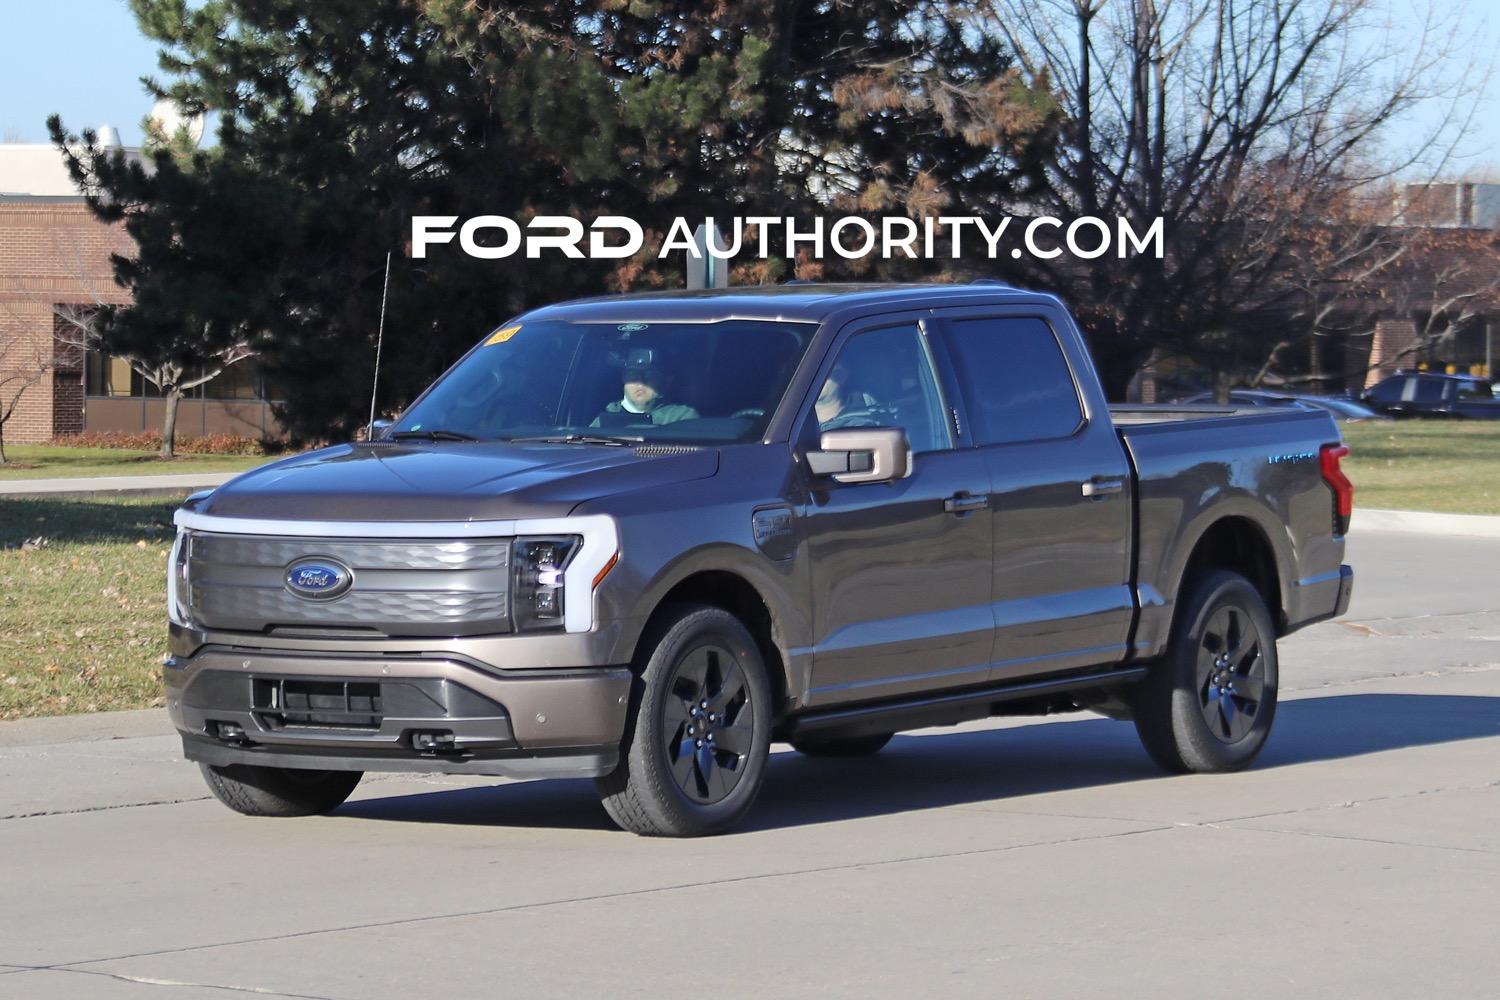 Ford F-150 Lightning STONE GRAY F-150 Lightning Photos & Club 2022-Ford-F-150-Lightning-Lariat-Stone-Gray-First-Real-World-Pictures-Exterior-003